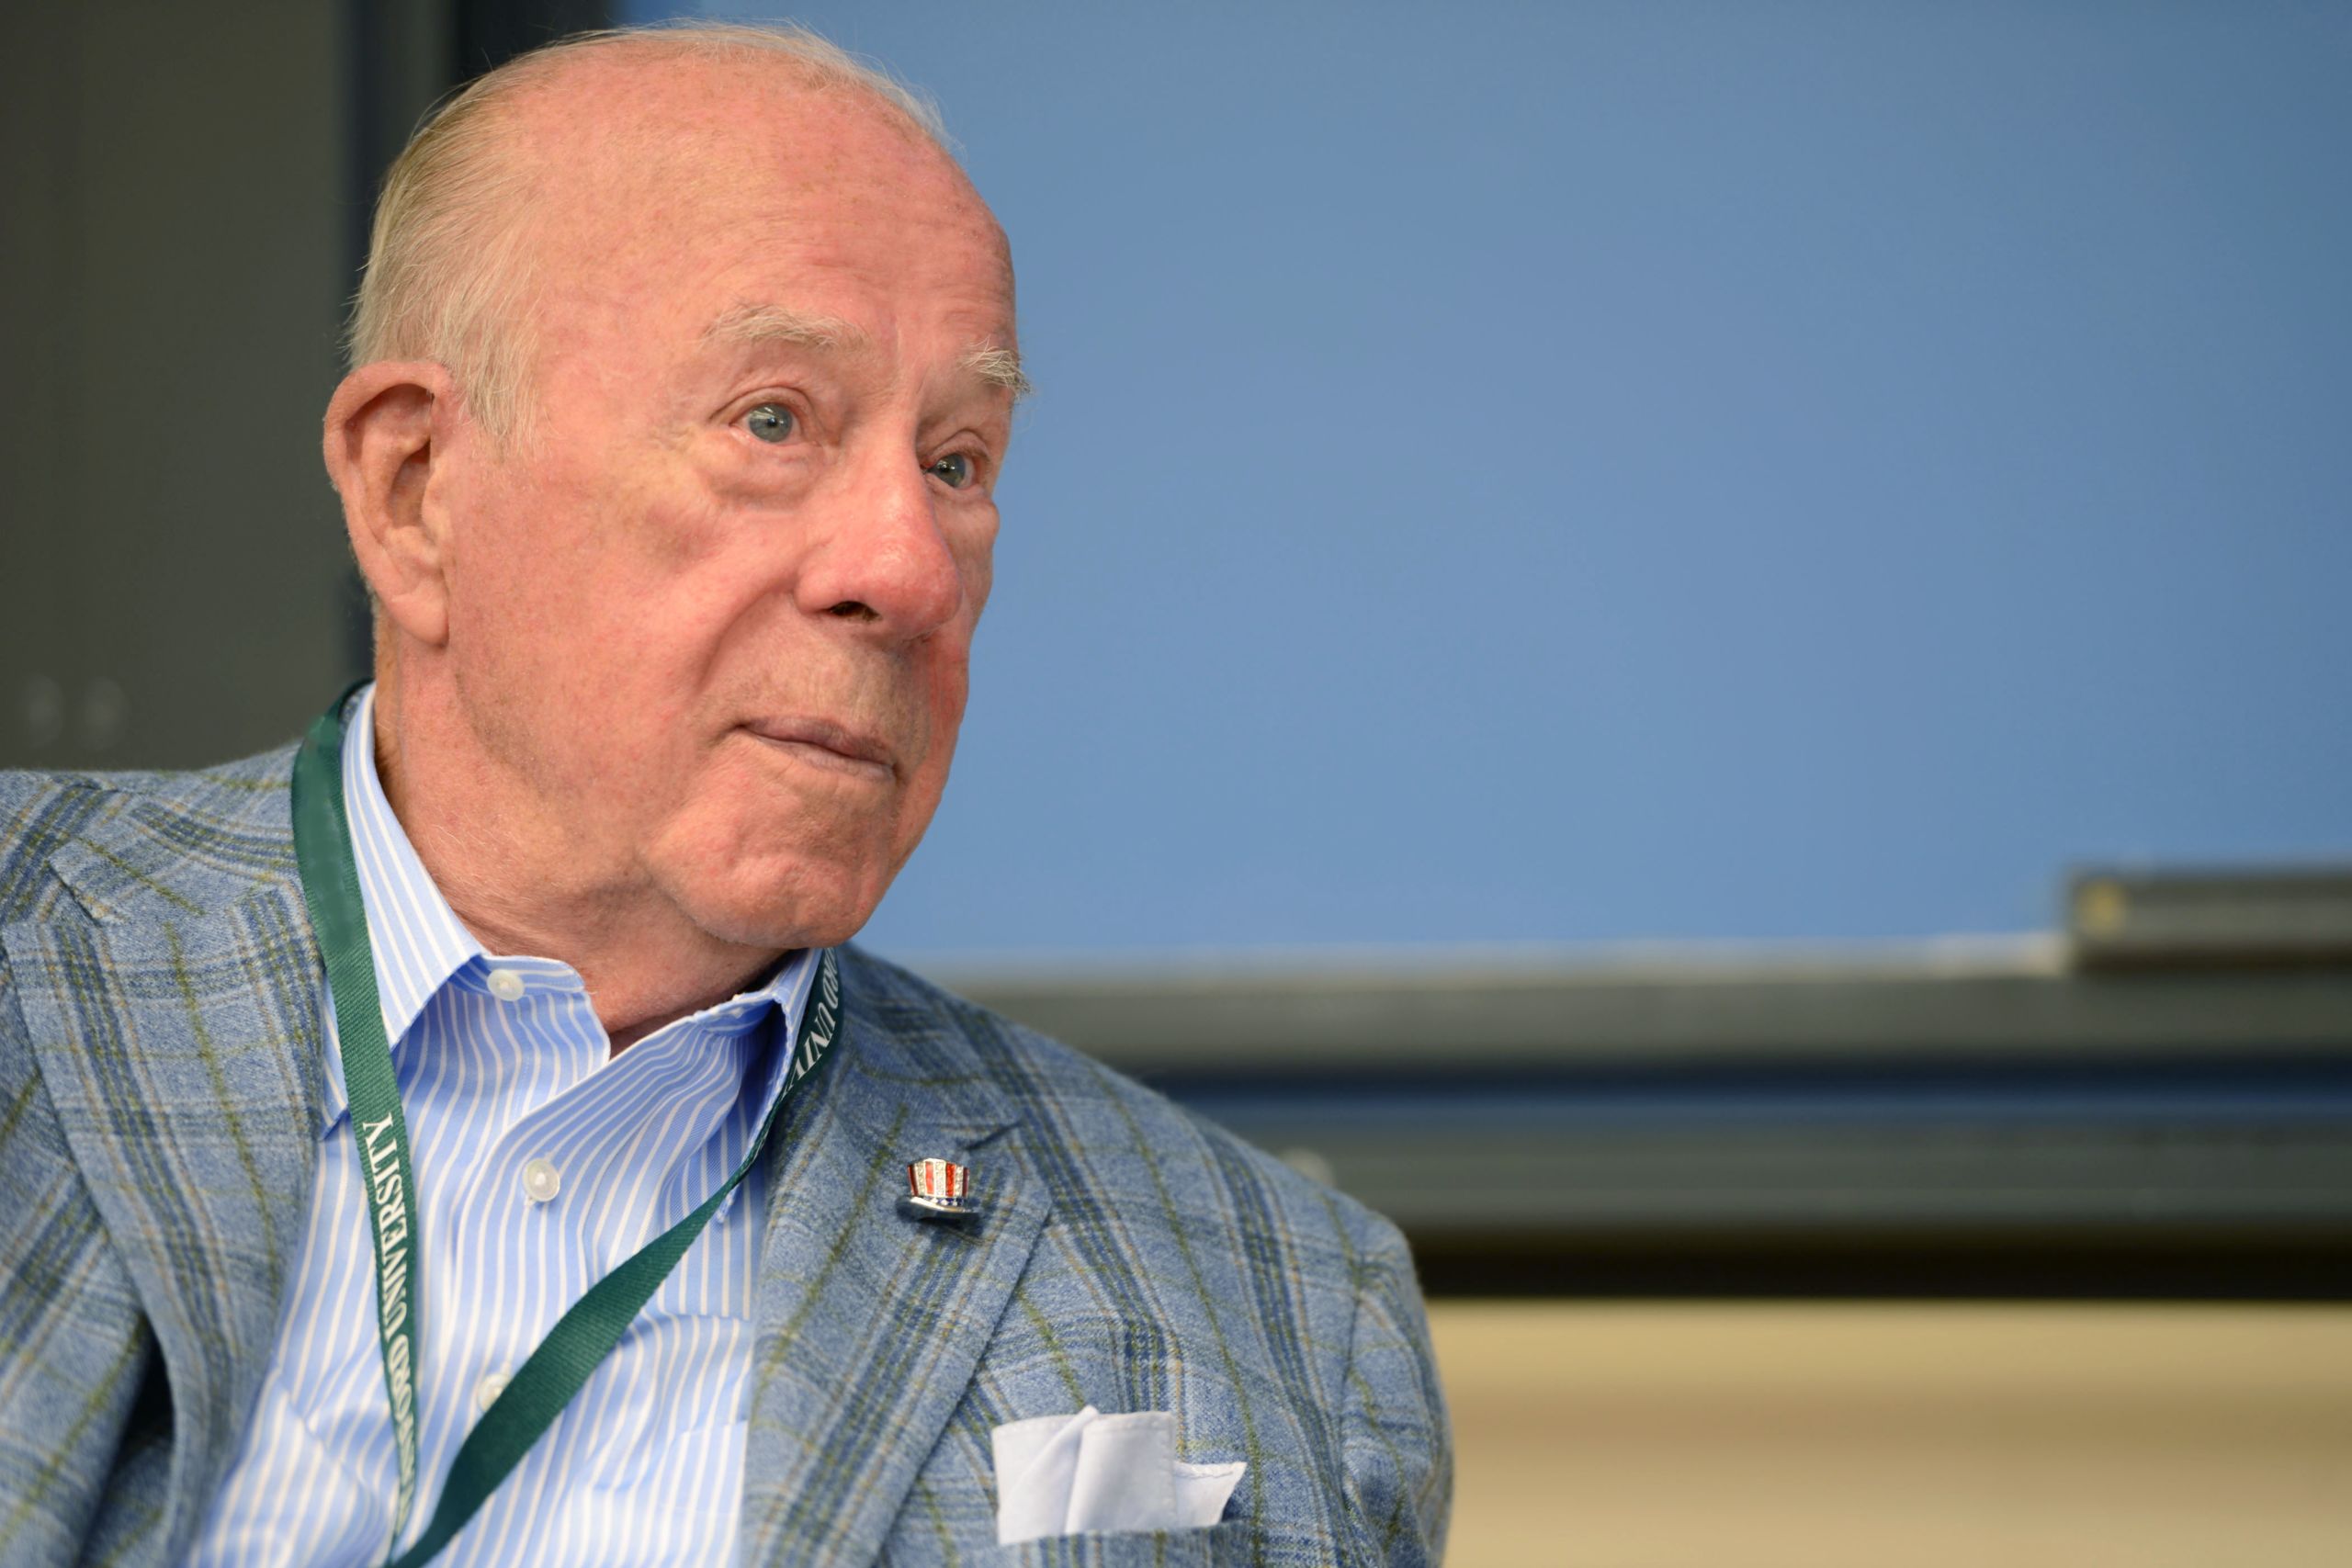 George Shultz at the Energy@Stanford & SLAC 2012 Conference. September 10, 2012